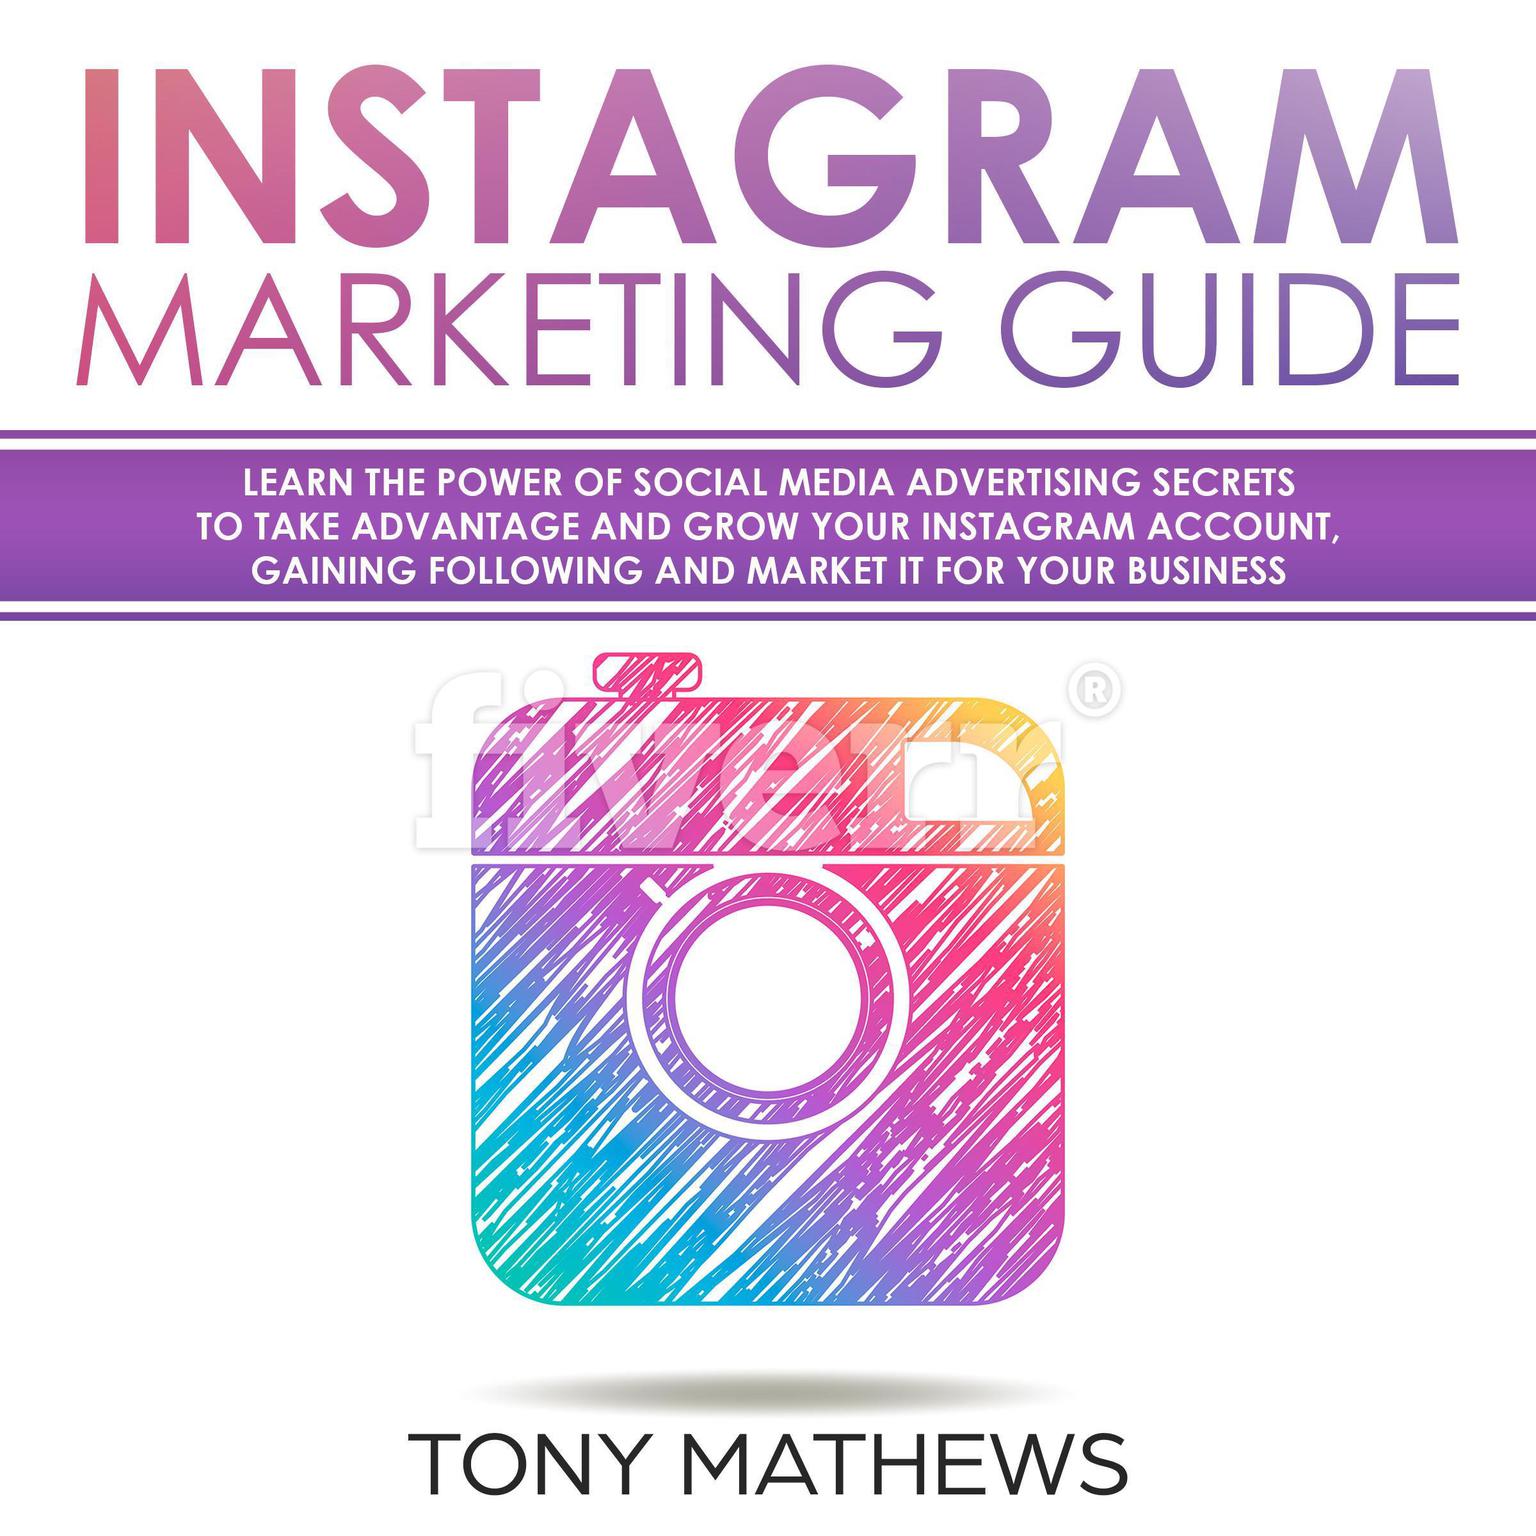 Instagram Marketing Guide: Learn the Power of Social Media Advertising Secrets to Take Advantage and Grow Your Instagram Account, Gaining Following and Market It for Your Business Audiobook, by Tony Mathews